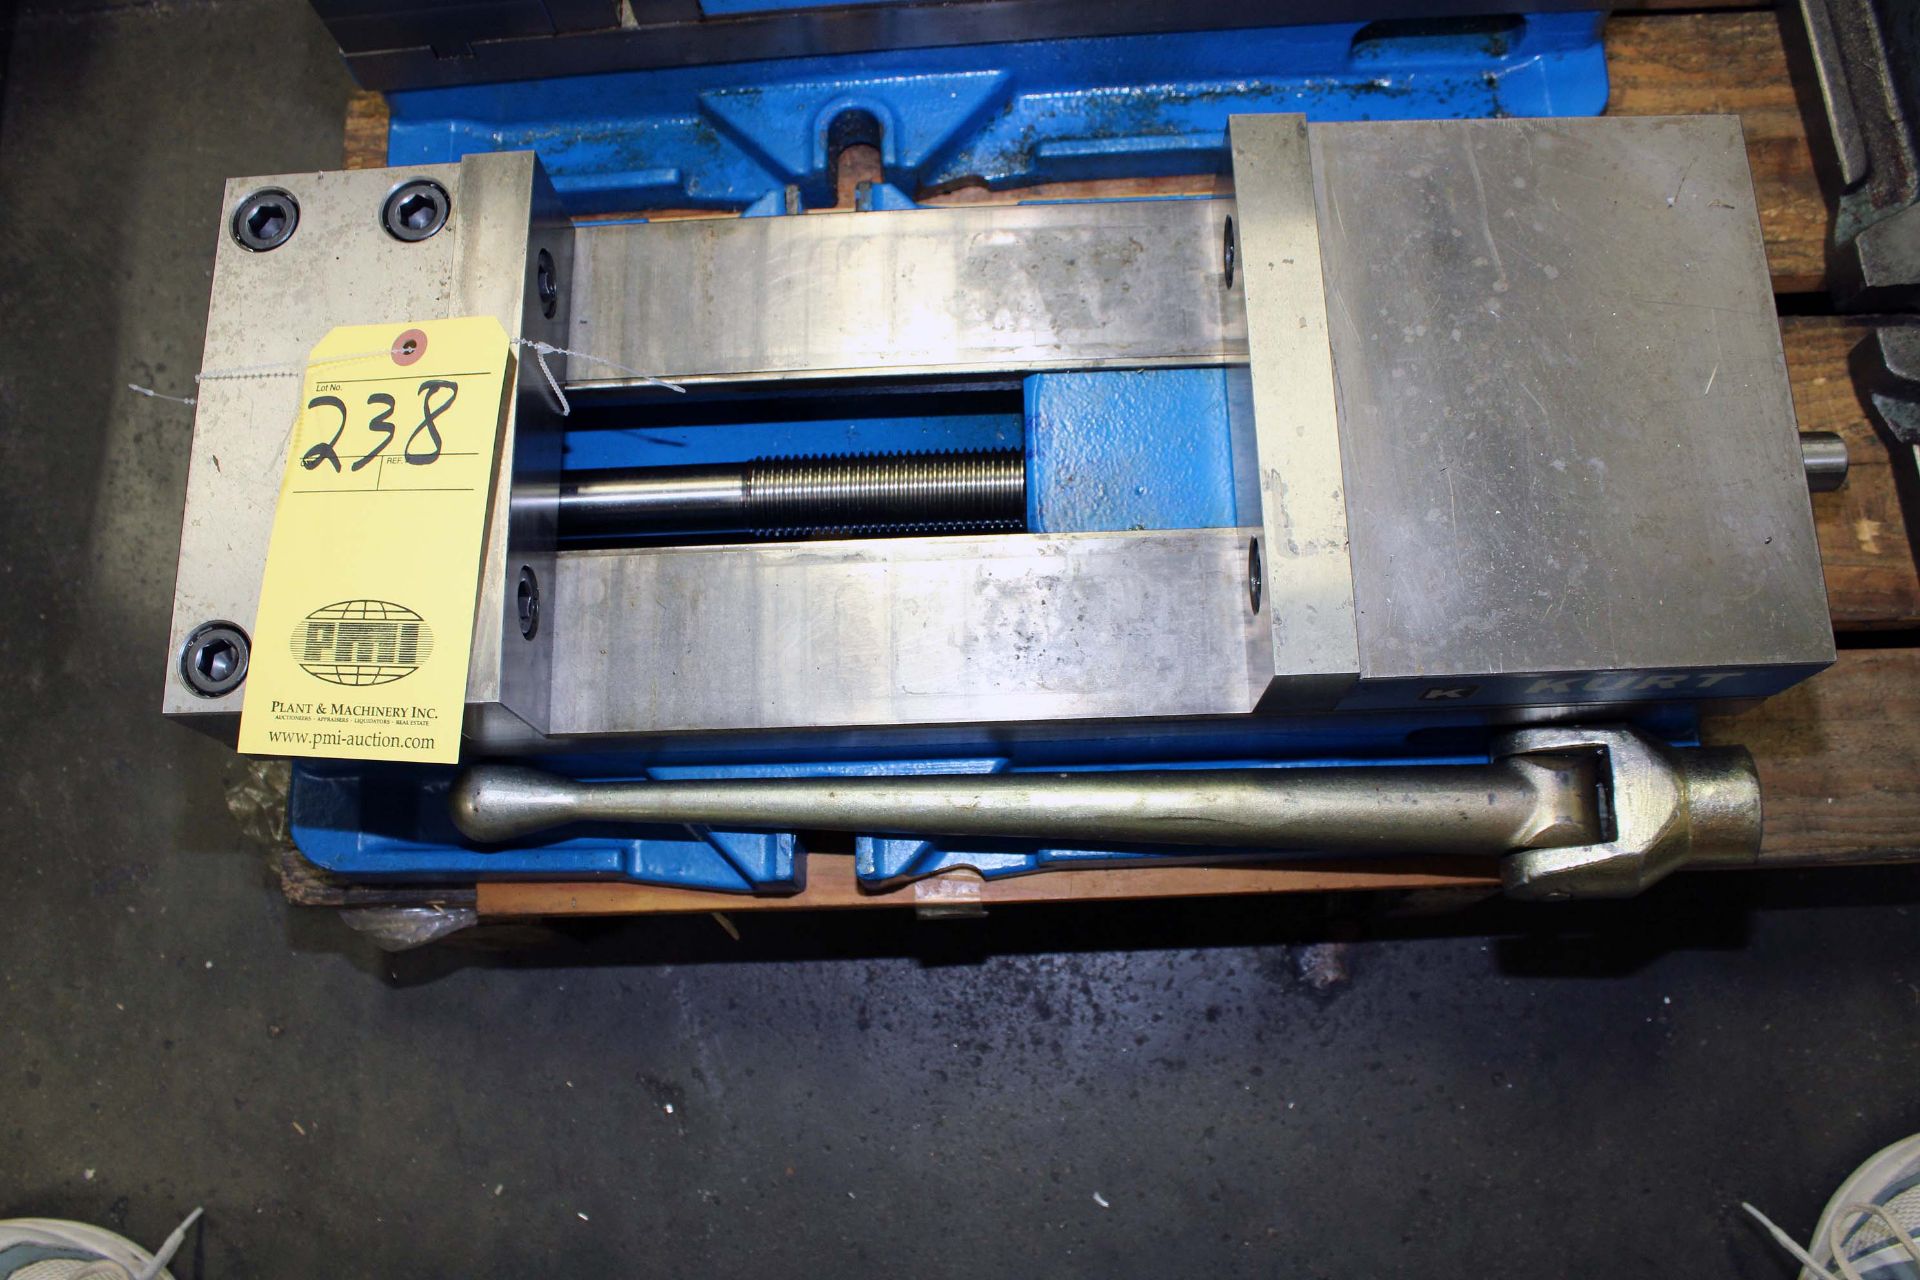 VISE, KURT 10", 9-3/4" jaw opening, 2-1/2" jaw height, 80,000 PSI max. clamping force